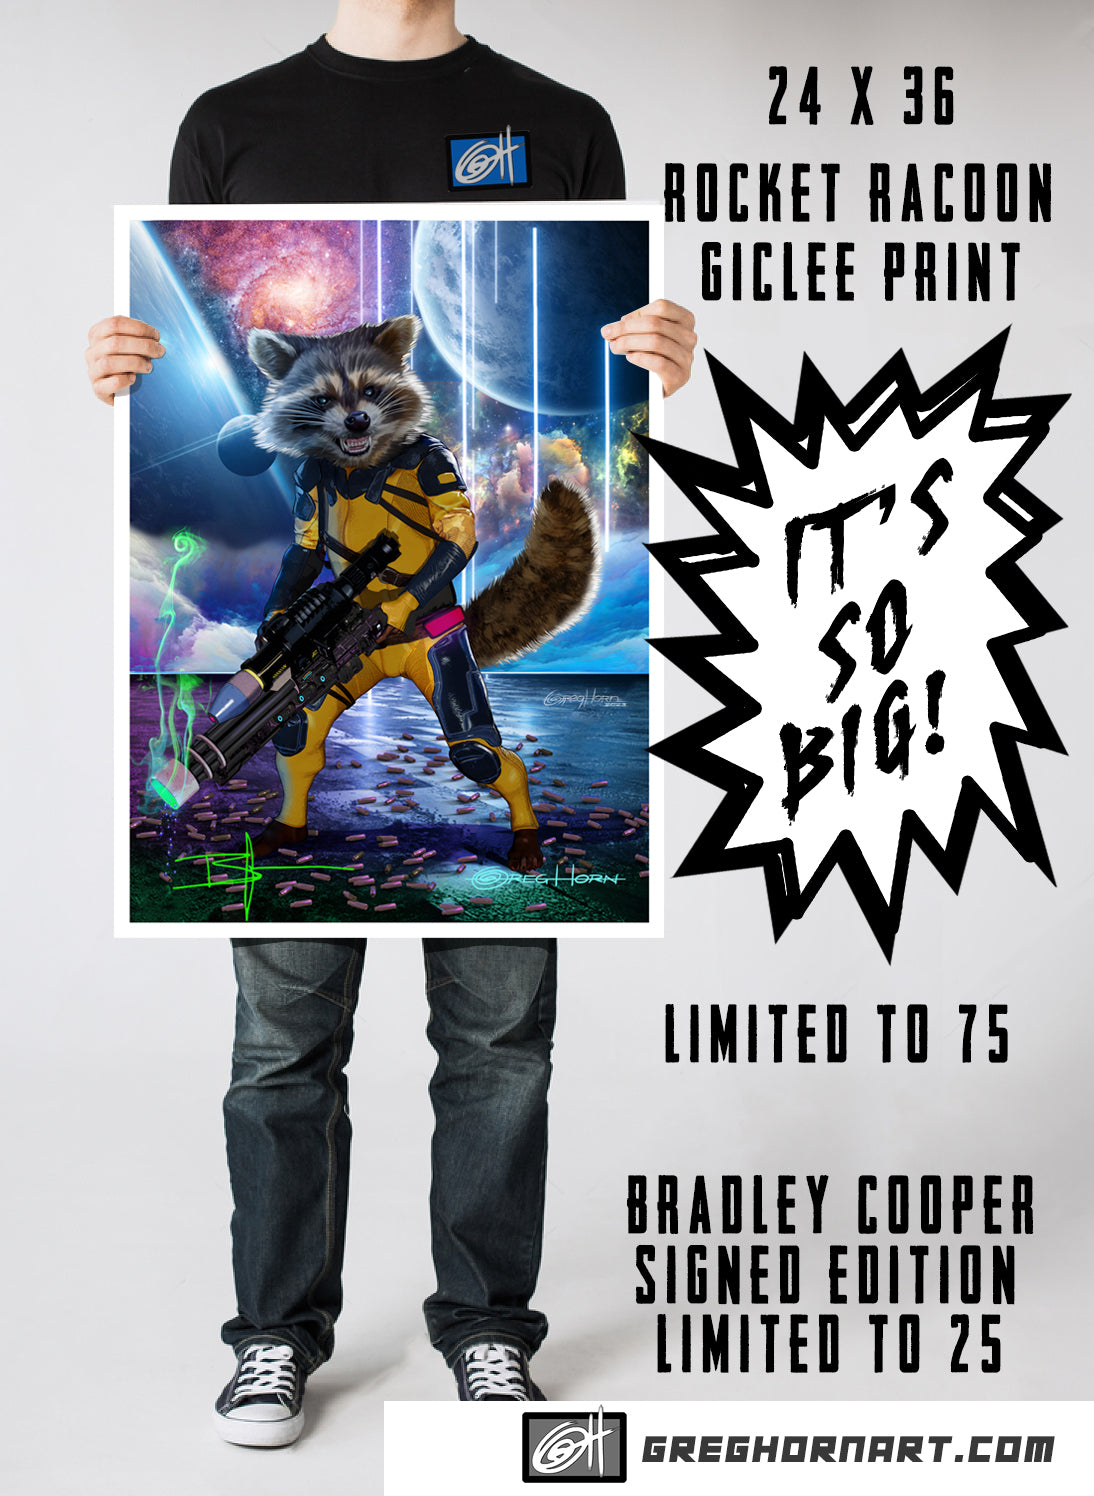 ROCKET RACOON - 24 x 36 Giclee print - w Bradley Cooper Limited Edition